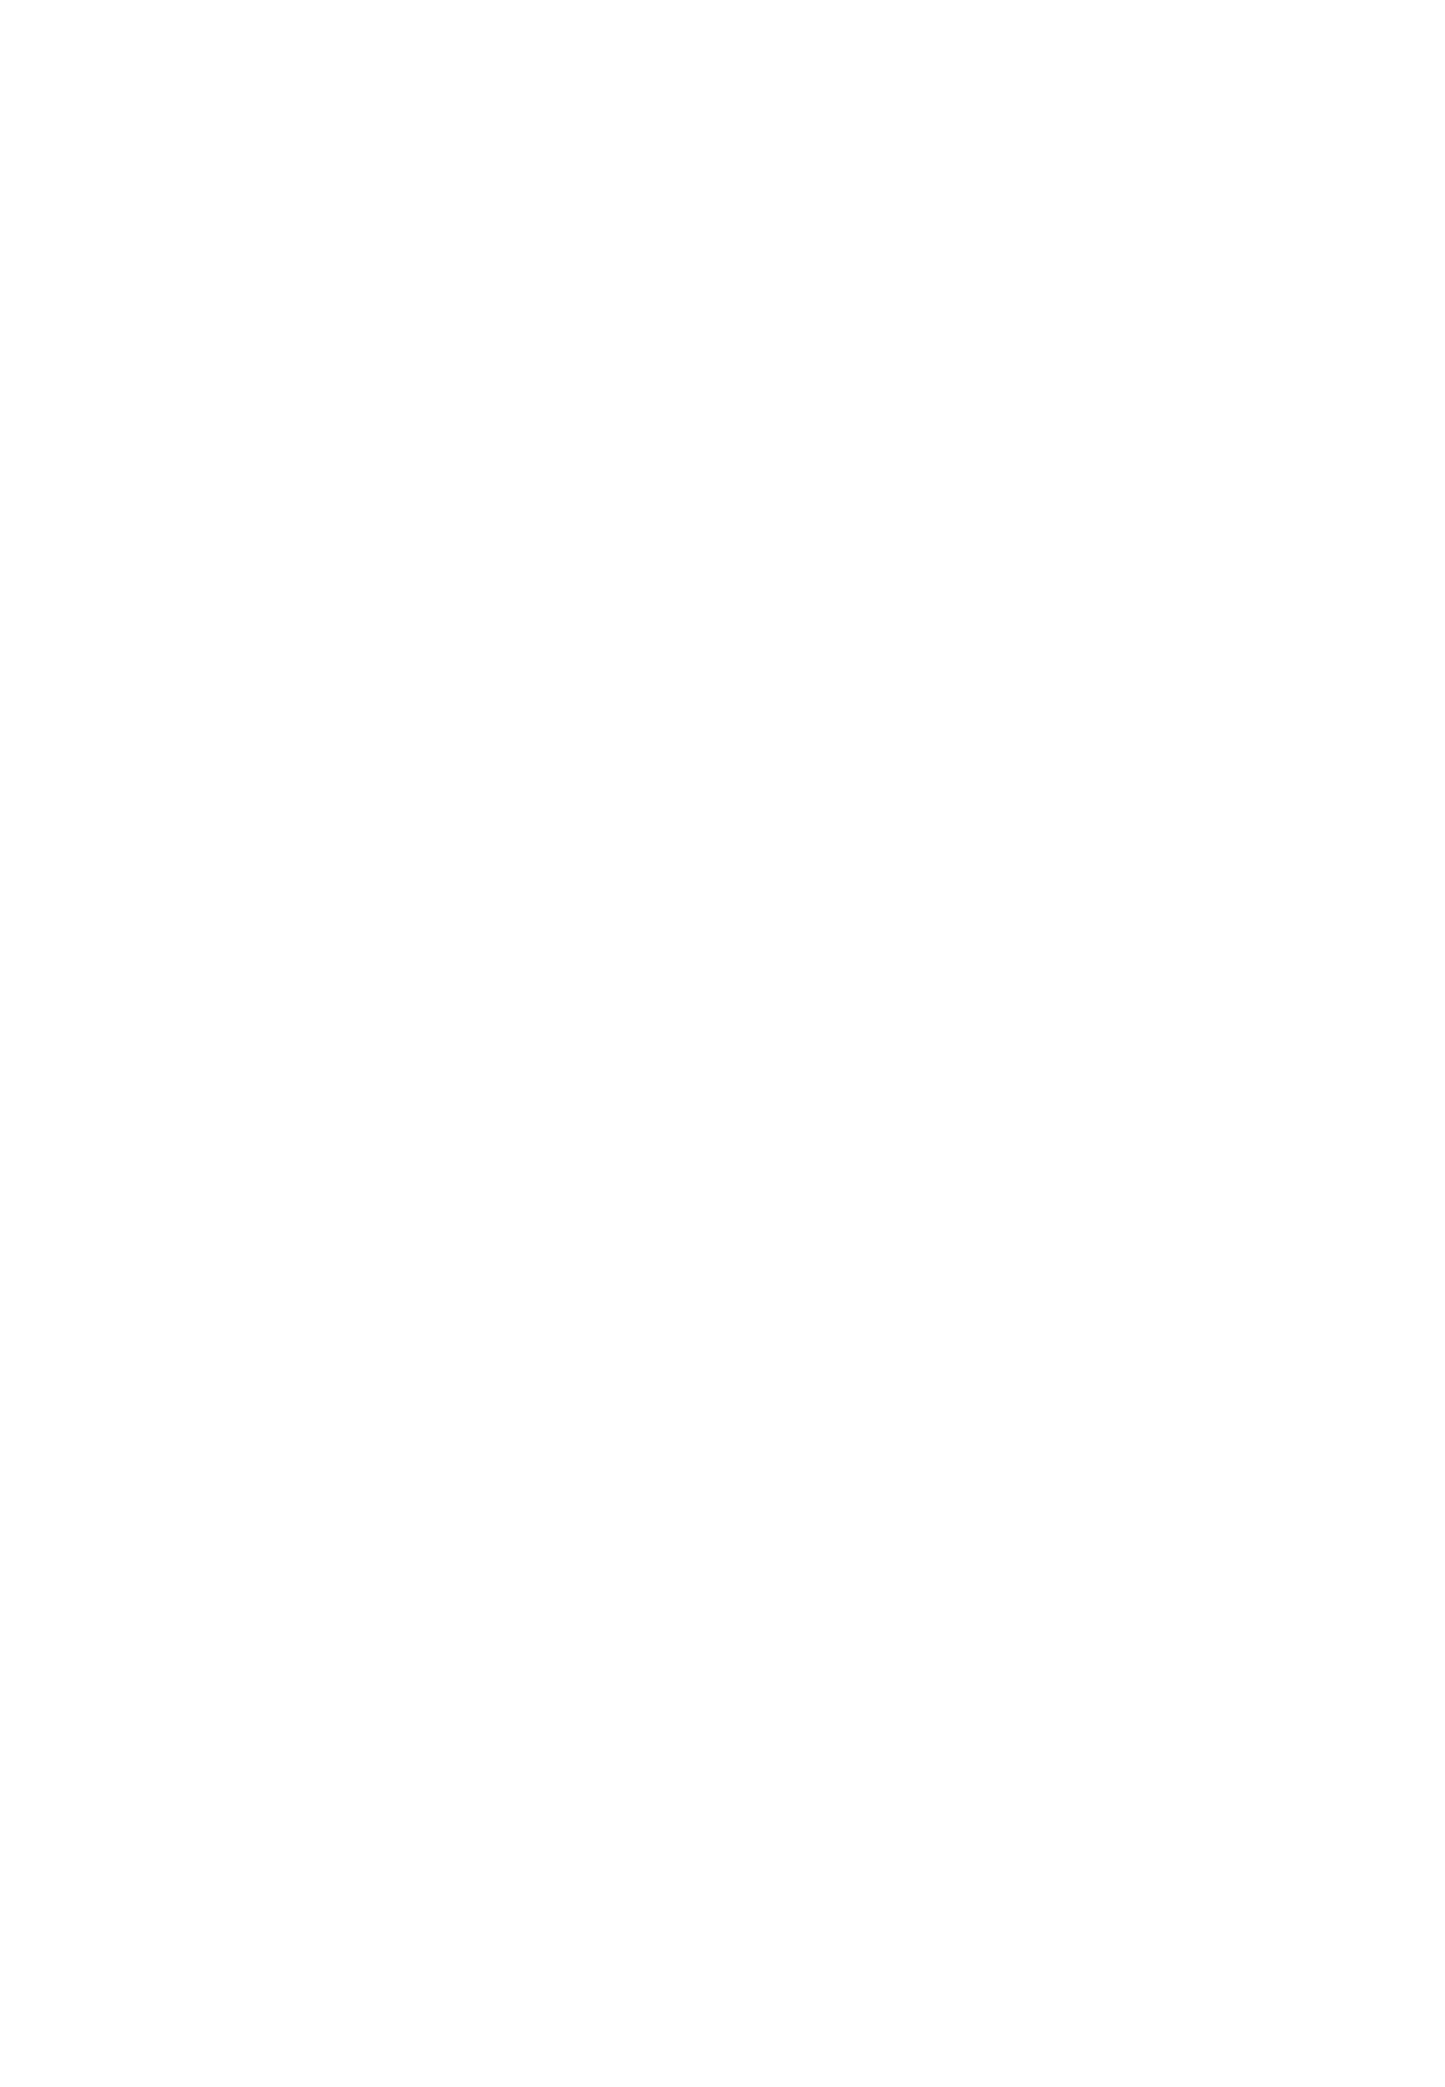 Don’t Just Leave Mad